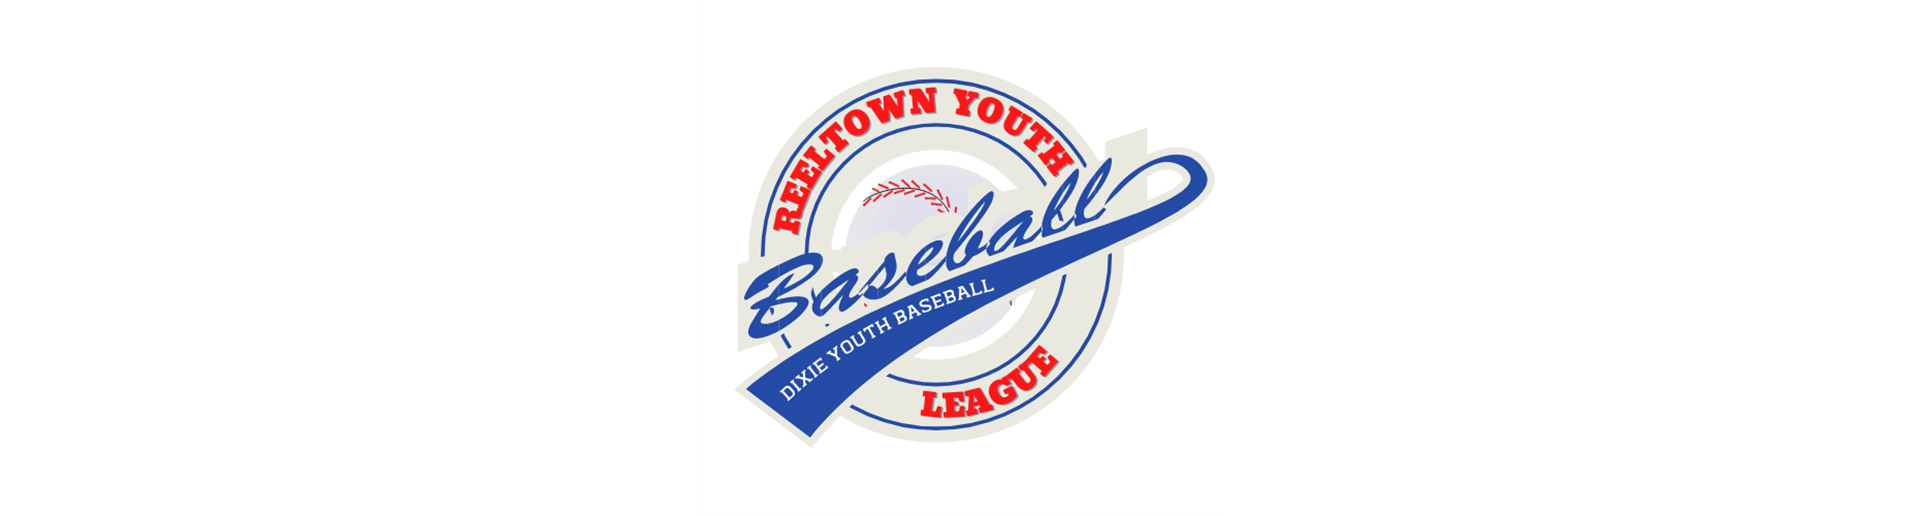 Welcome to Reeltown Youth Baseball League! 